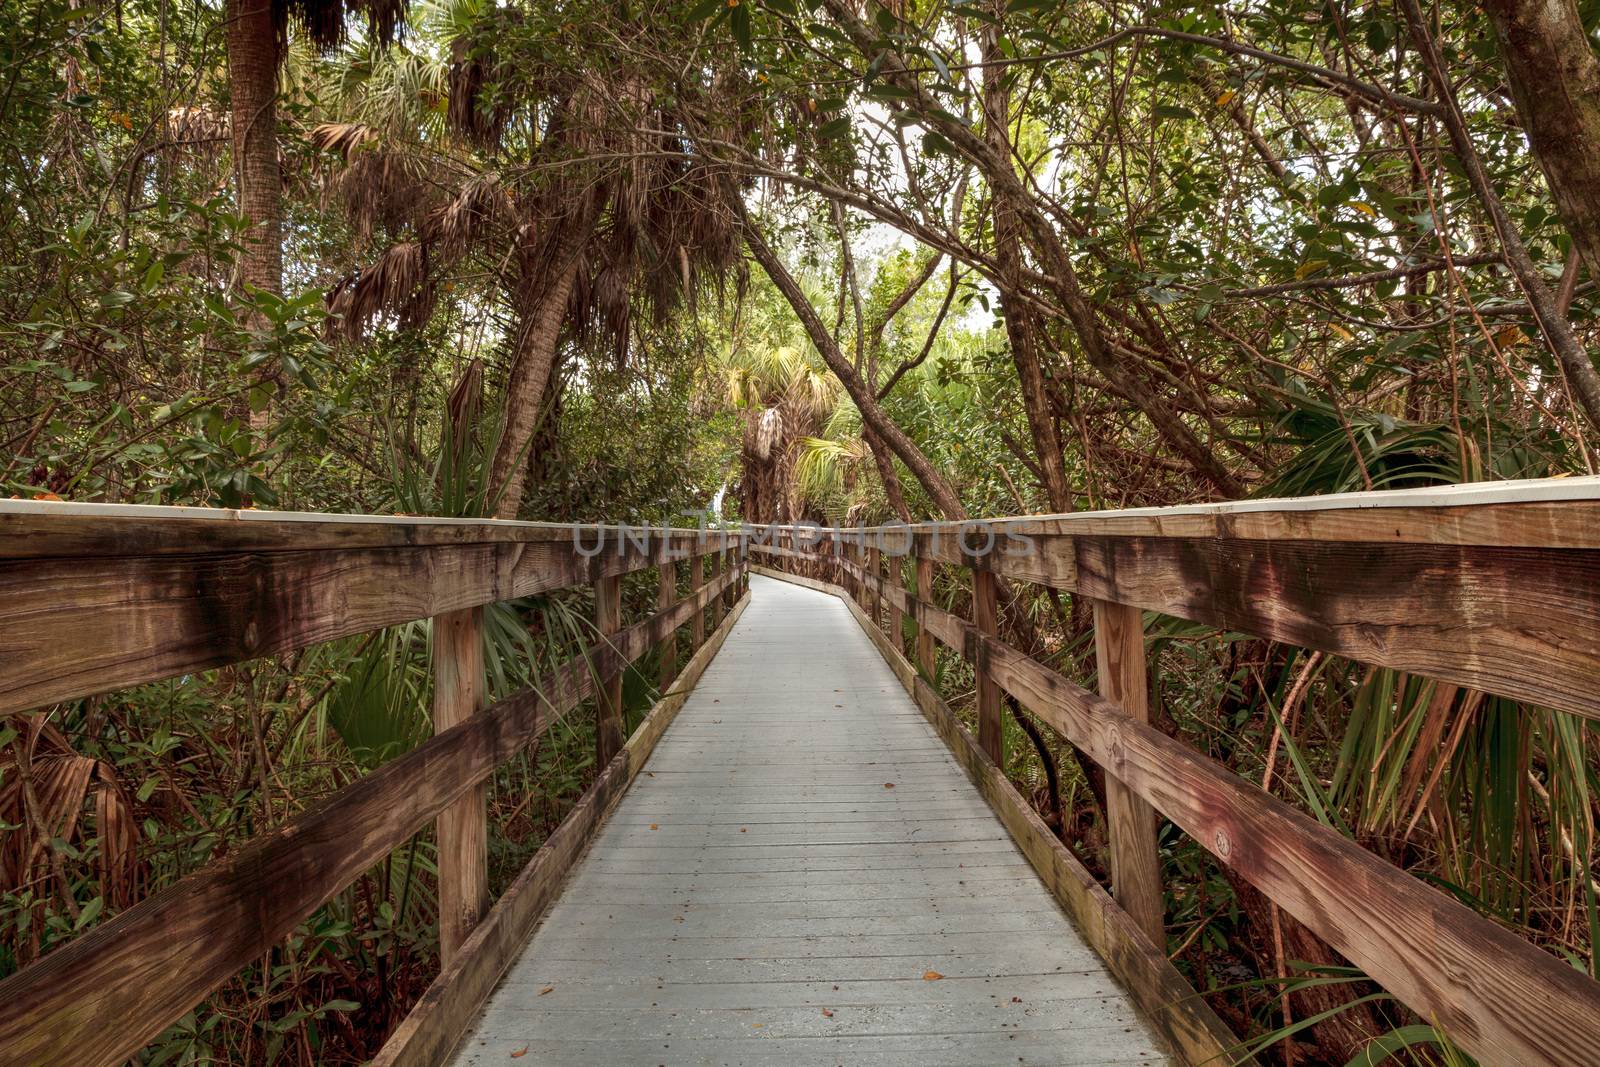 Fort Myers, Florida, USA – November 1, 2020:  Boardwalk that extends through Manatee Park in Fort Myers, Florida.